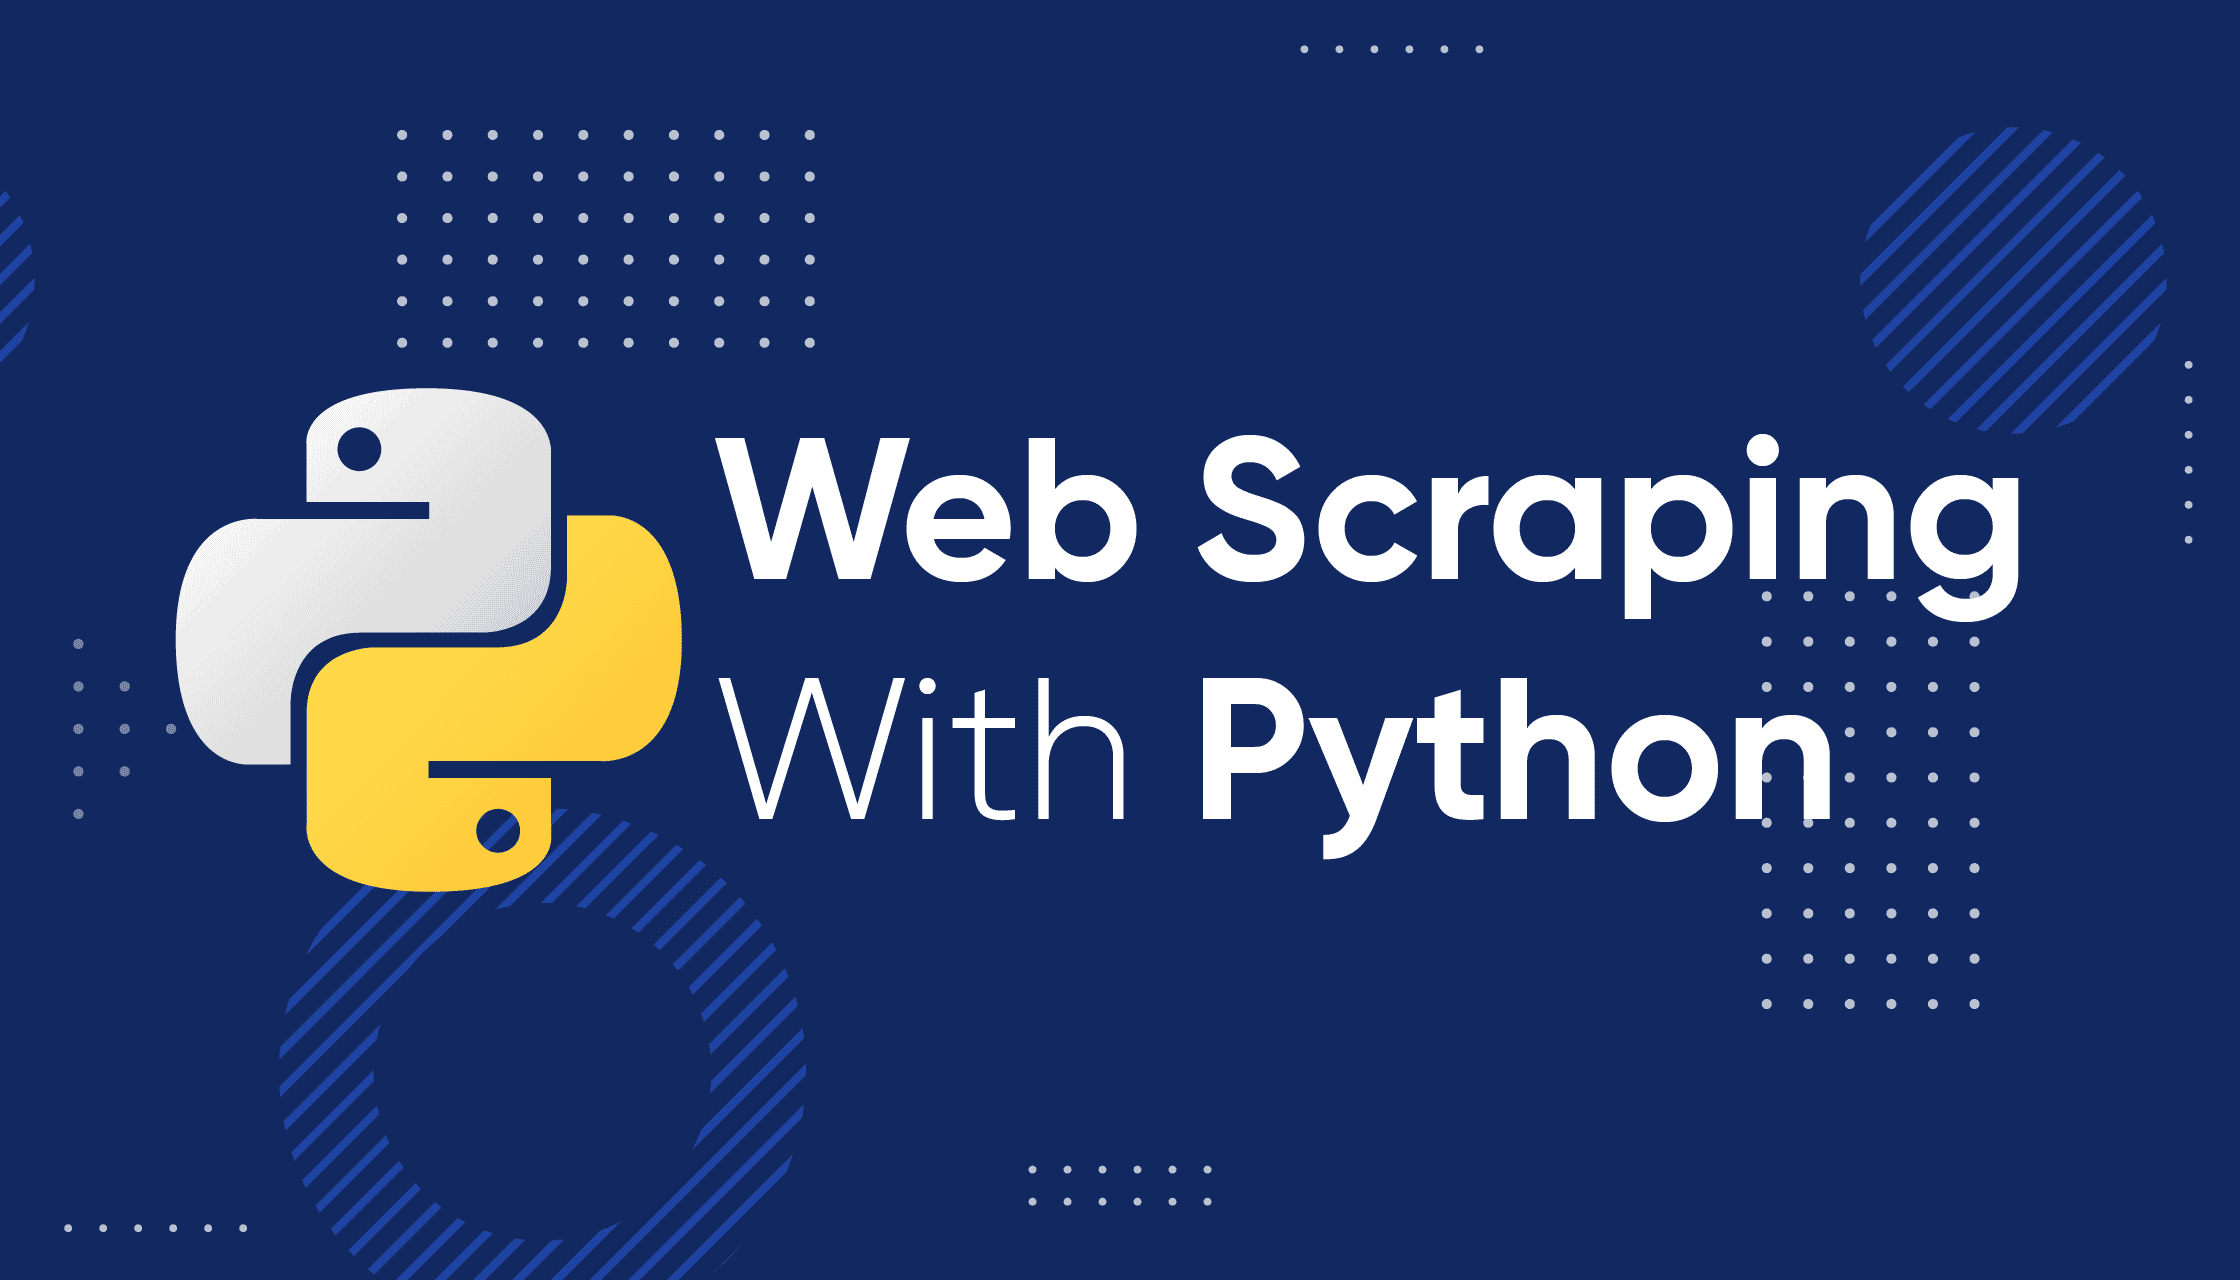 Everything You Should Know About Python in Web Scraping